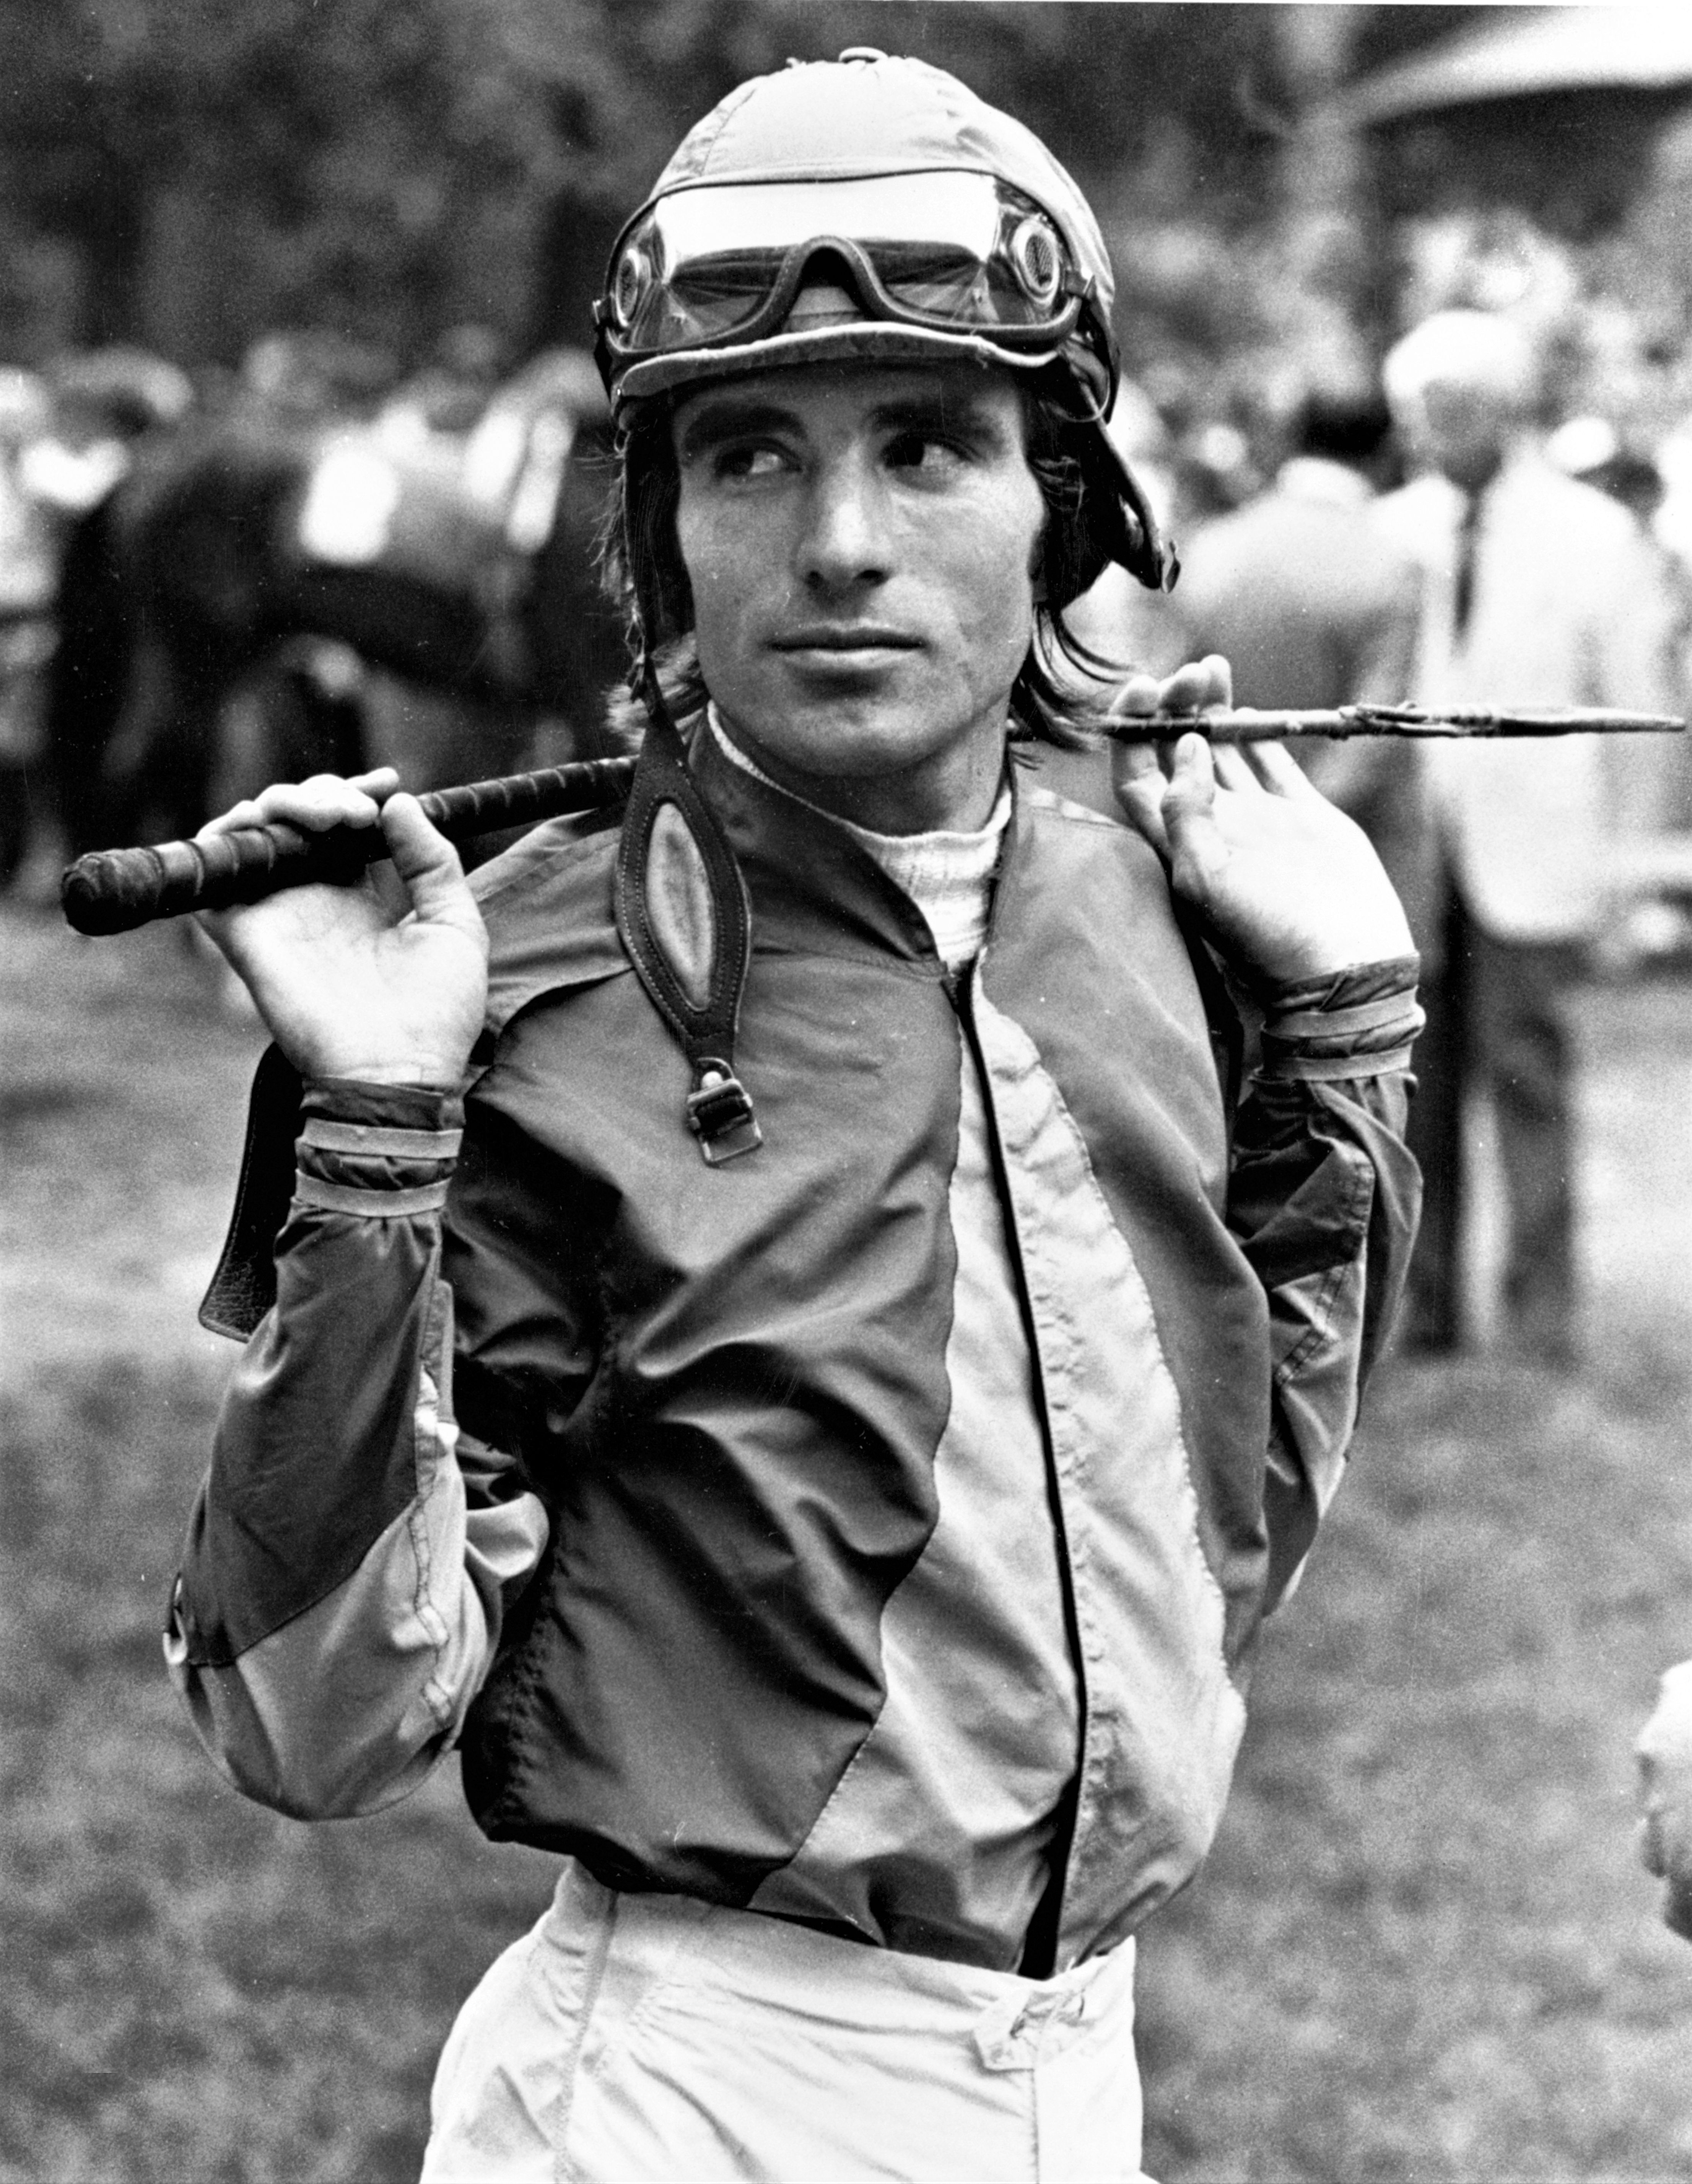 Darrel McHargue in the paddock, October 1985 (Keeneland Library Thoroughbred Times Collection)